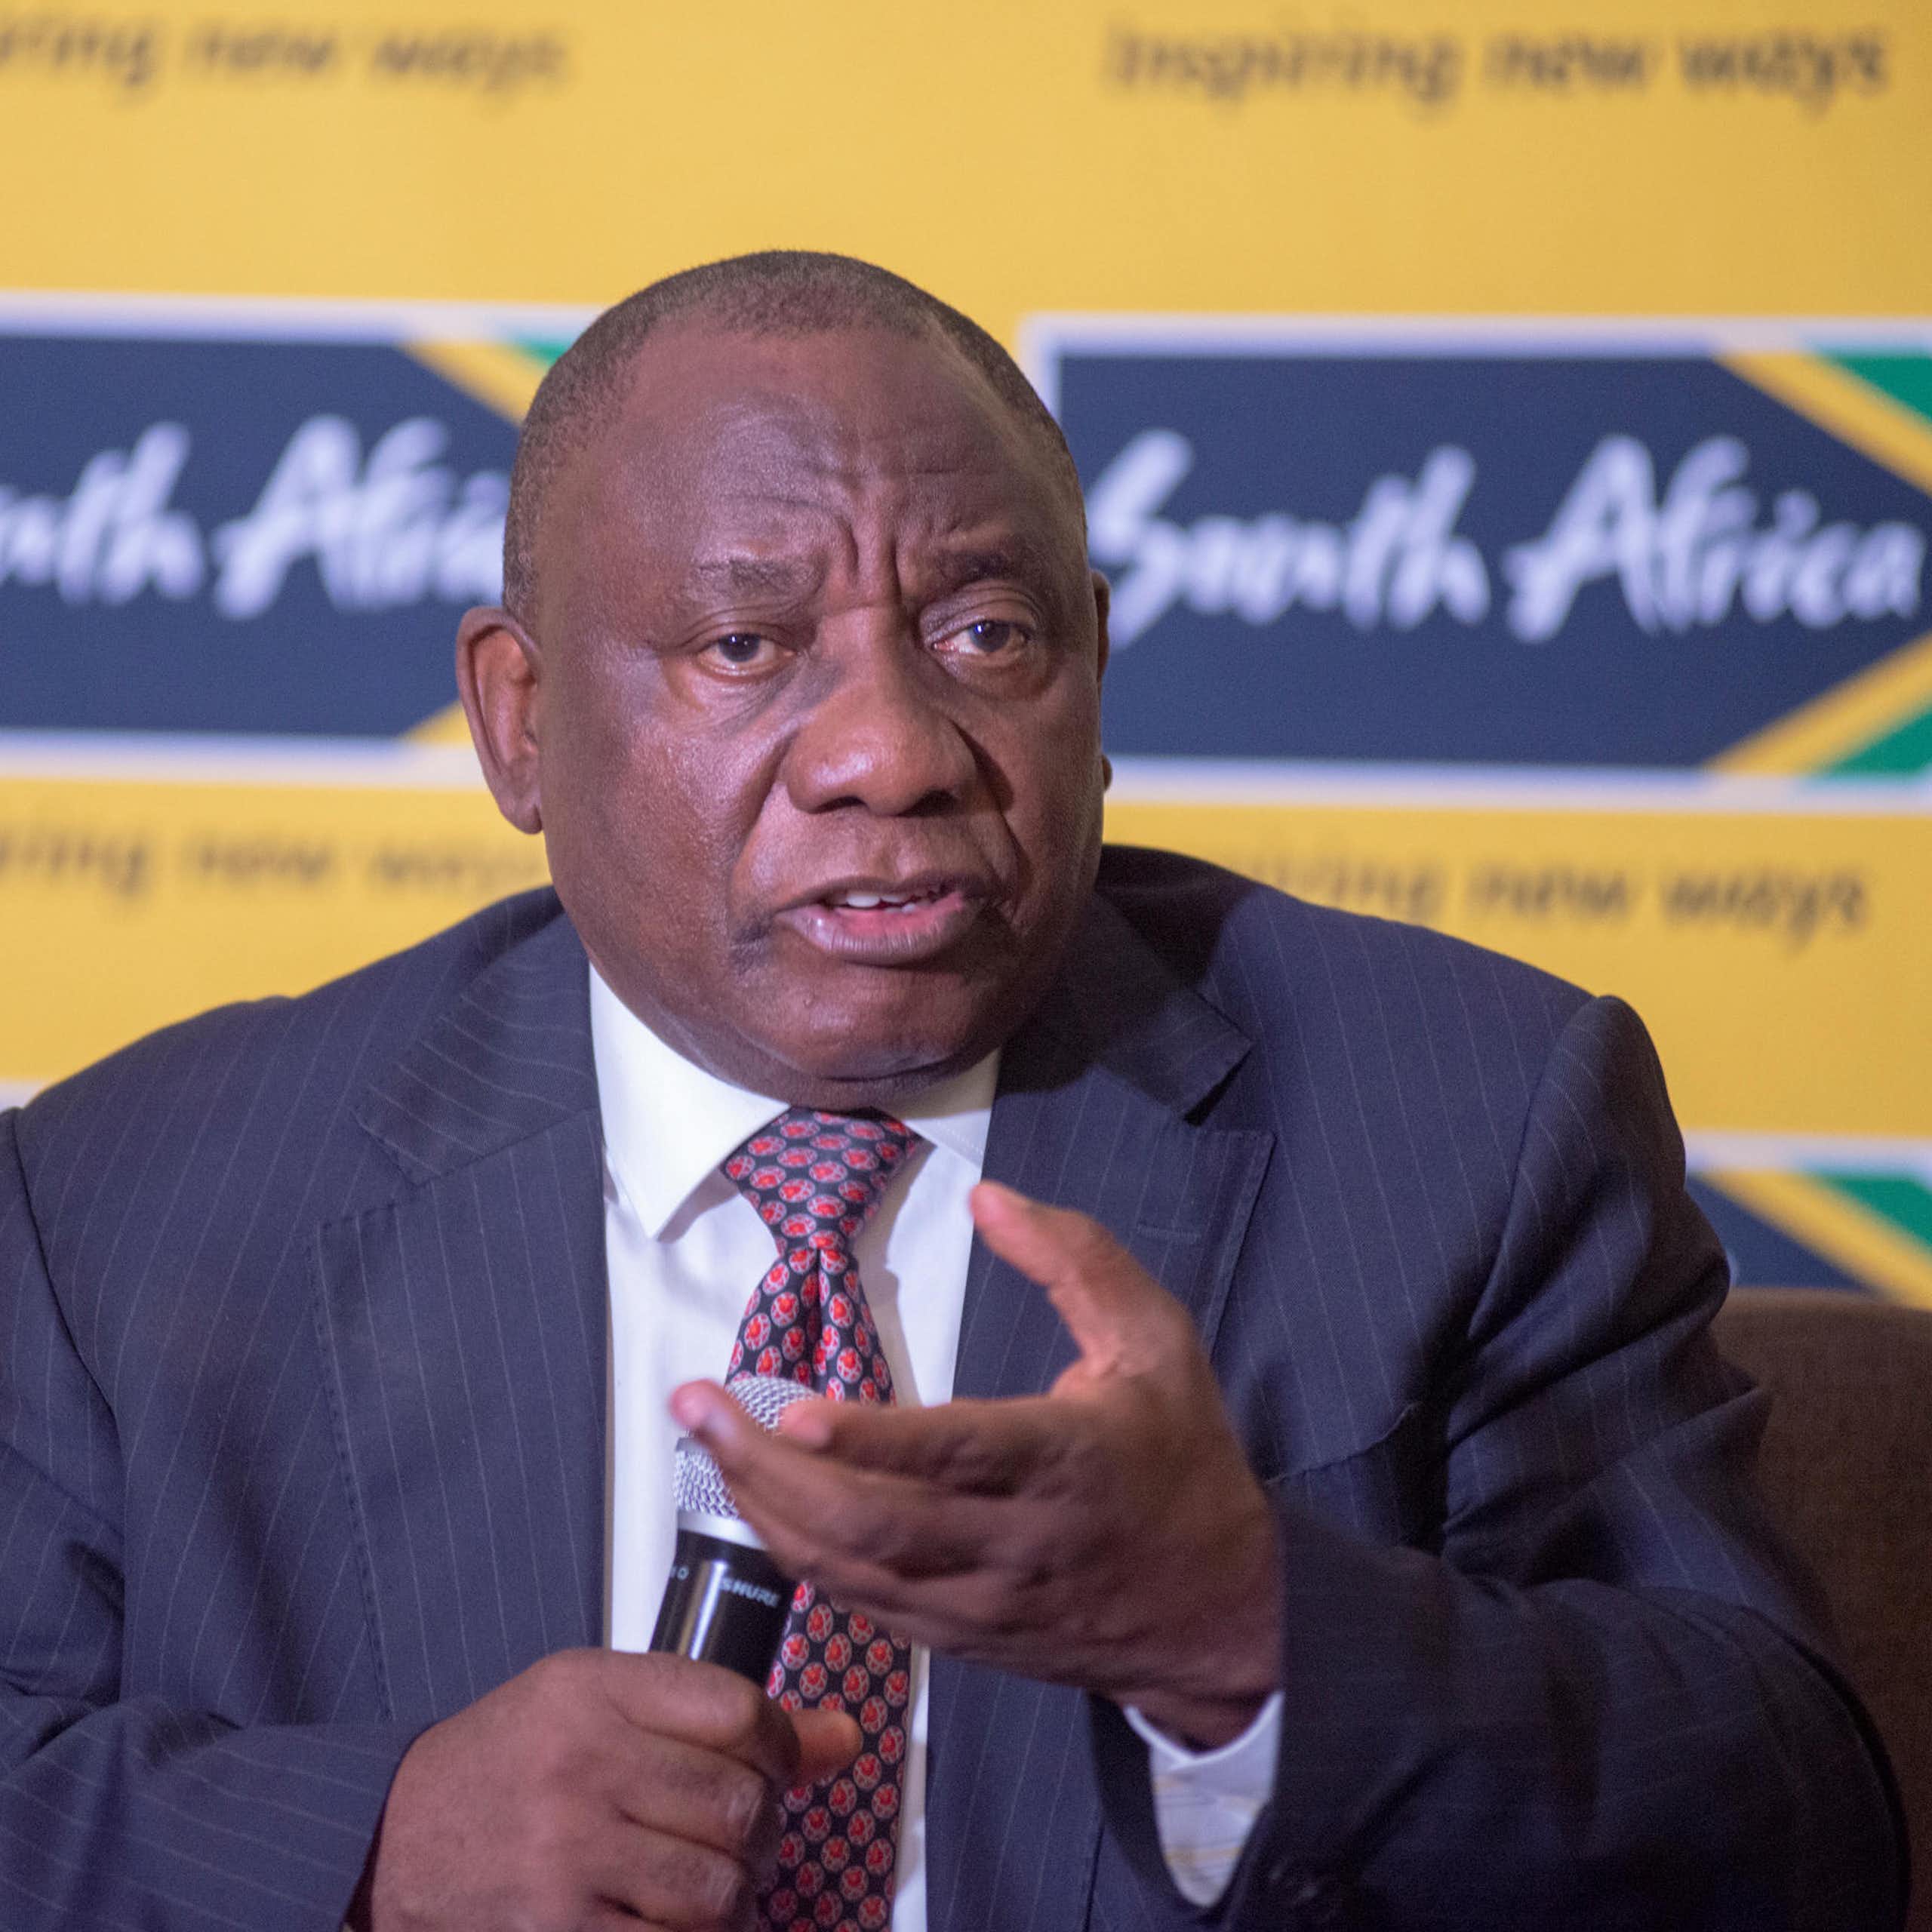 South African president Cyril Ramaphosa in front of South African flags.